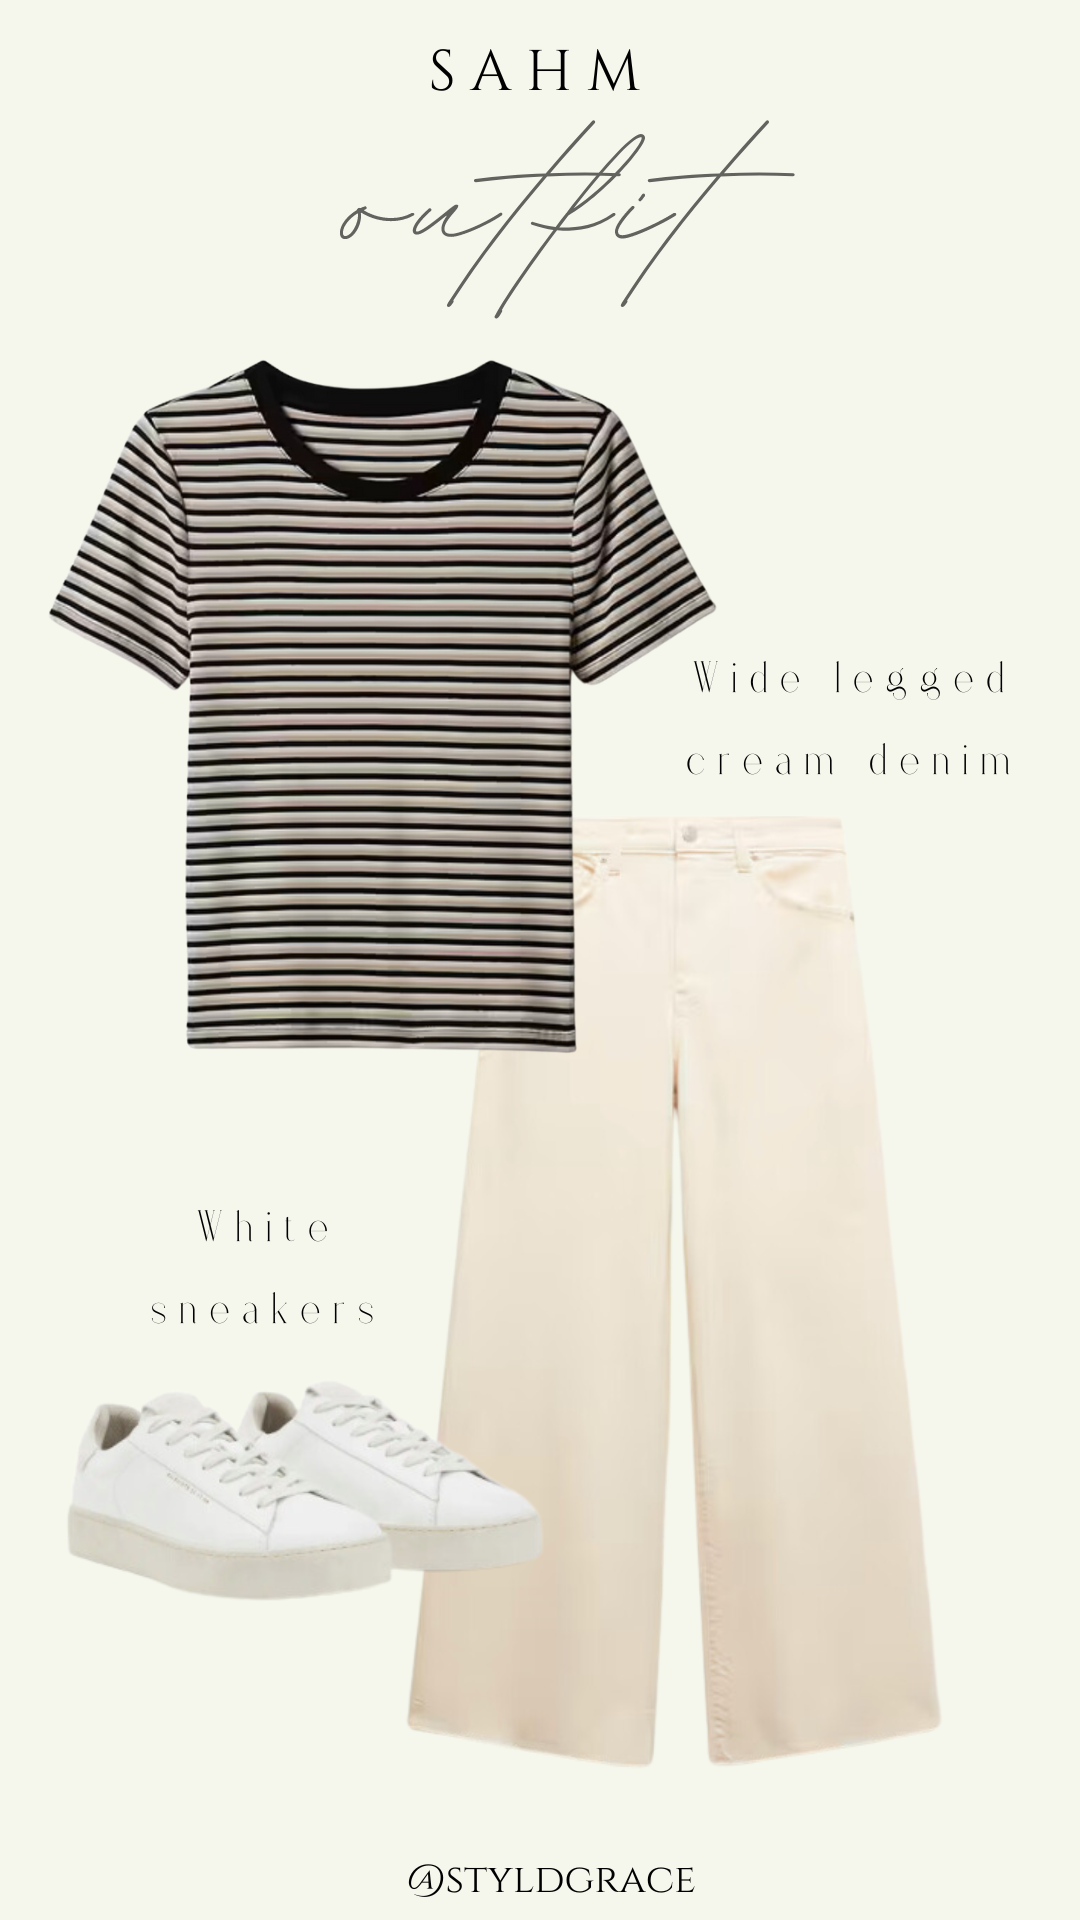 white legged cream denim, shirt, and white sneakers one of the sahm outfits